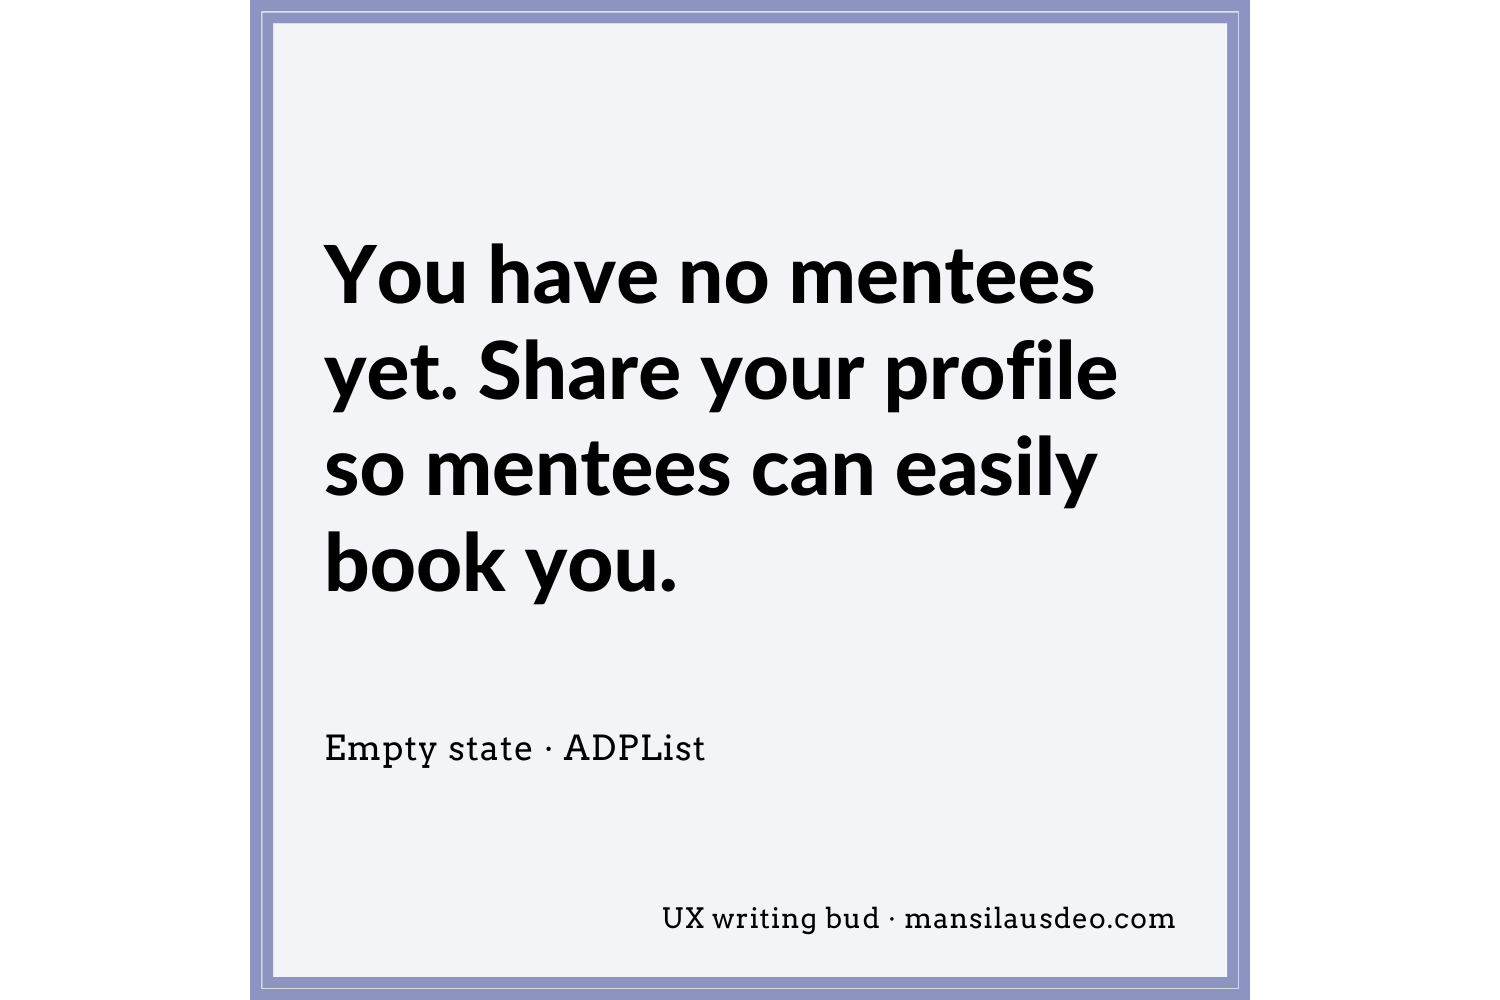 You have no mentees yet. Share your profile so mentees can easily book you. UX Writing Bud